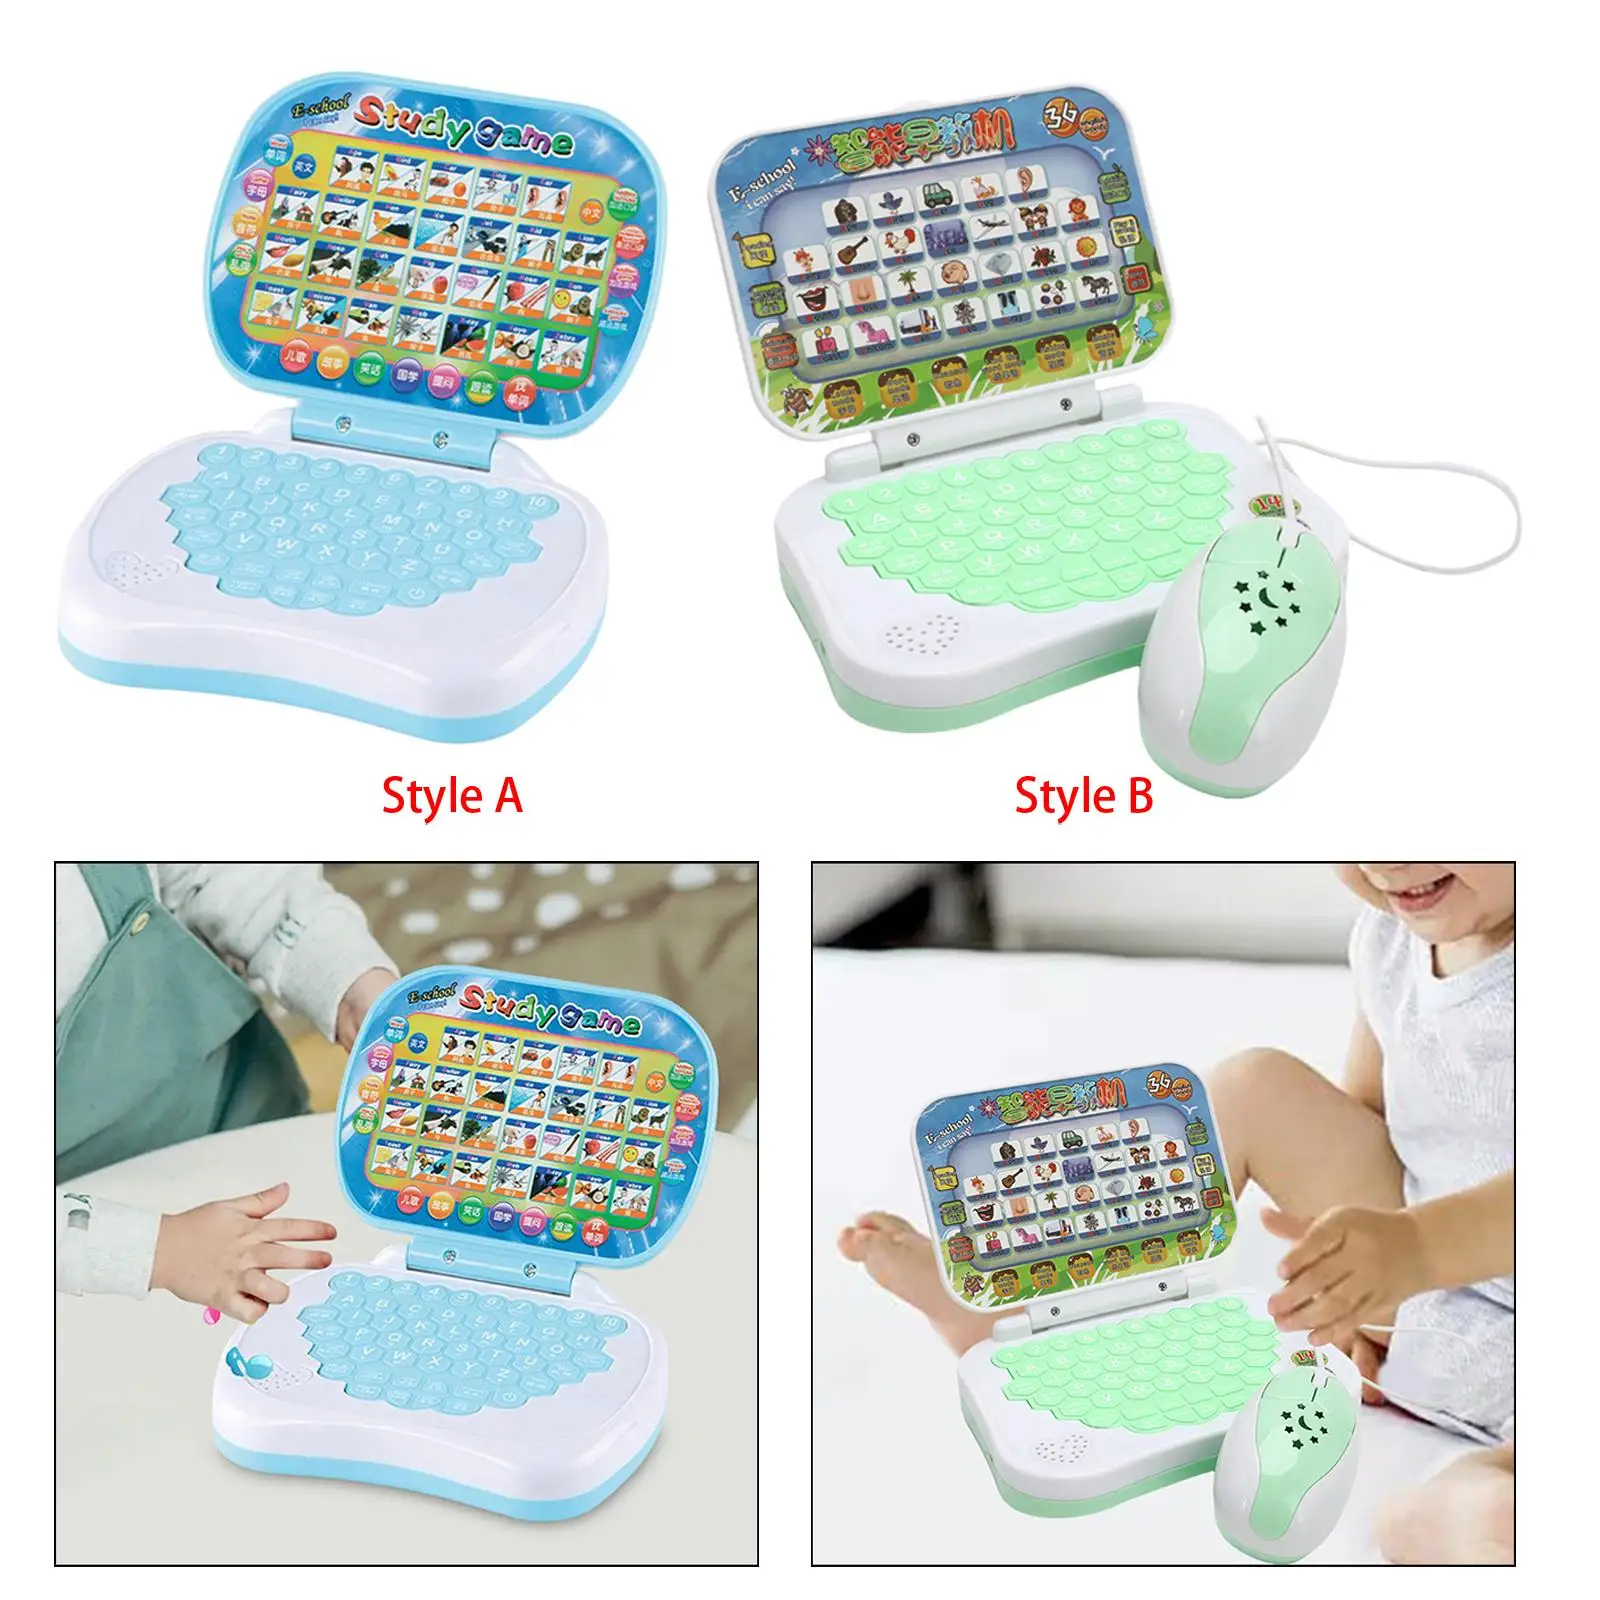 Handheld Language Learning Machine Activities Early Education Study Game Kids Laptop Toy for Kids Girls Boys Bithday Gifts